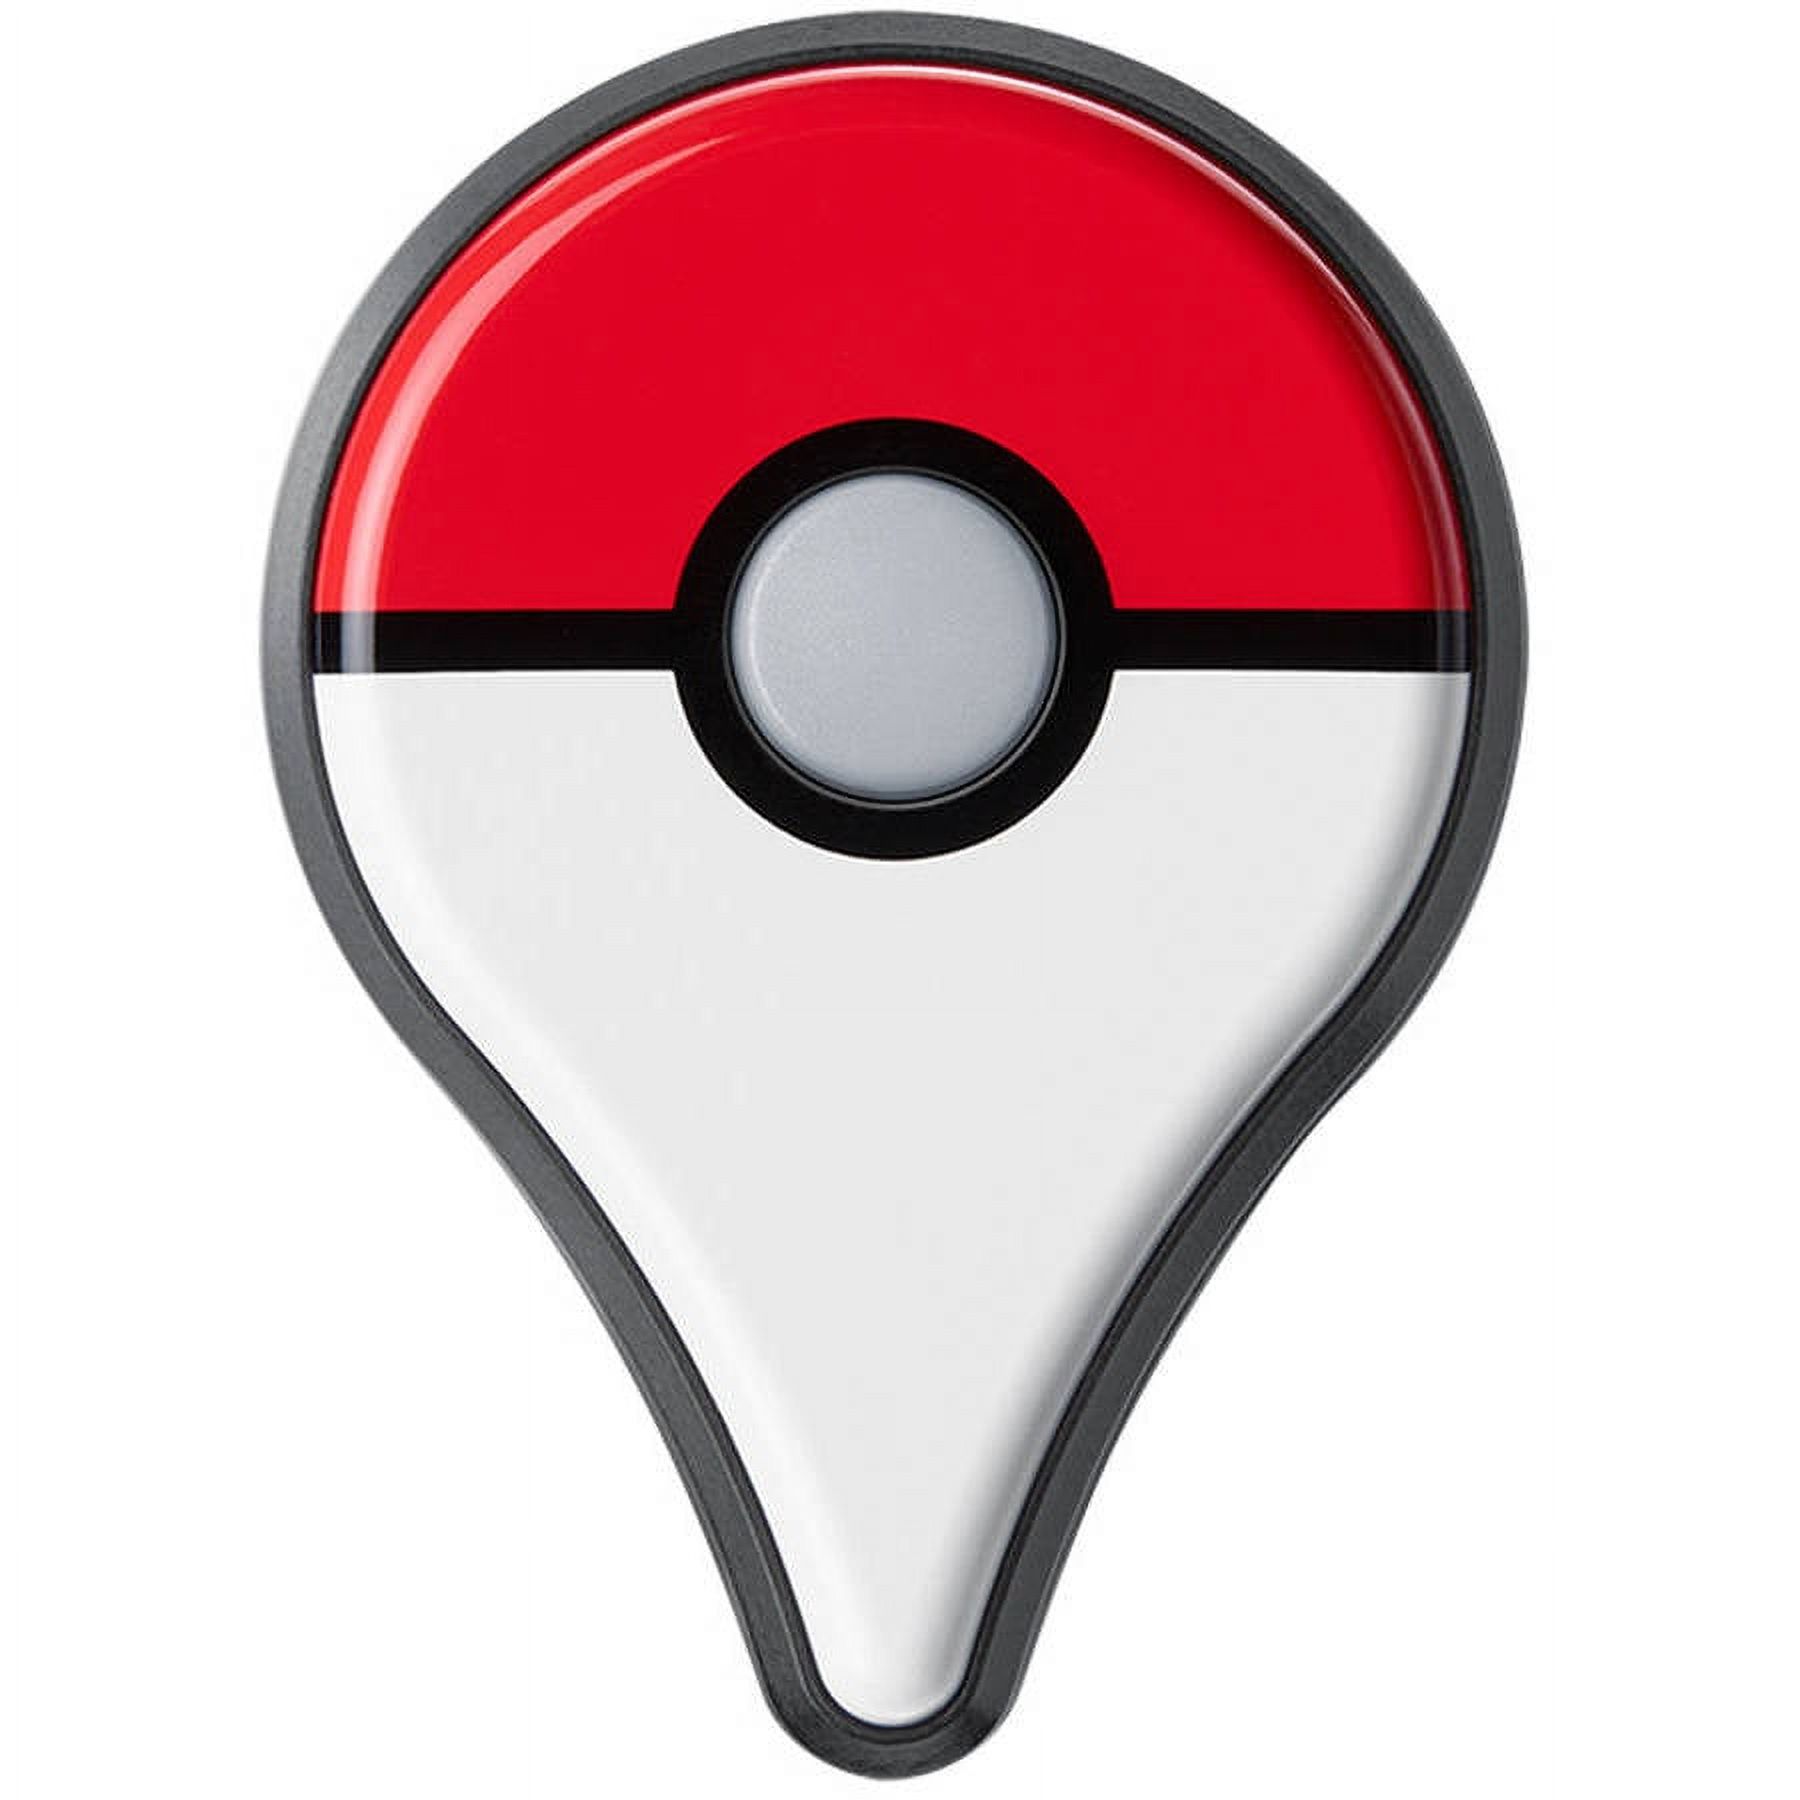 Pokemon GO Plus Accessory (Android & iOS Compatible) - image 3 of 6